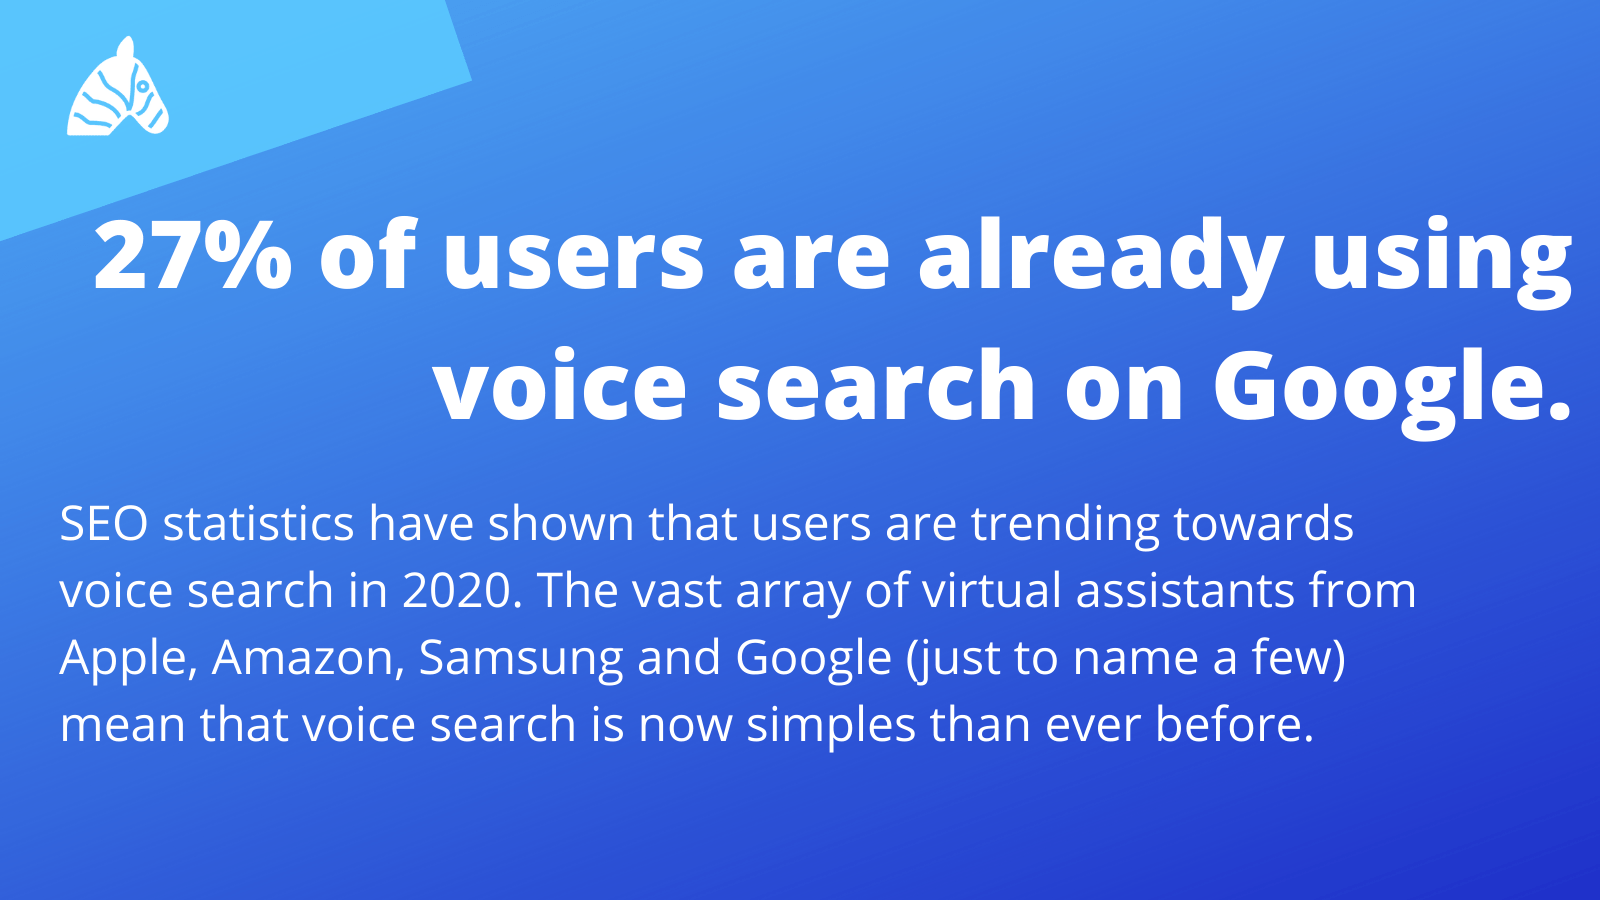 27% of users are already using voice search on Google